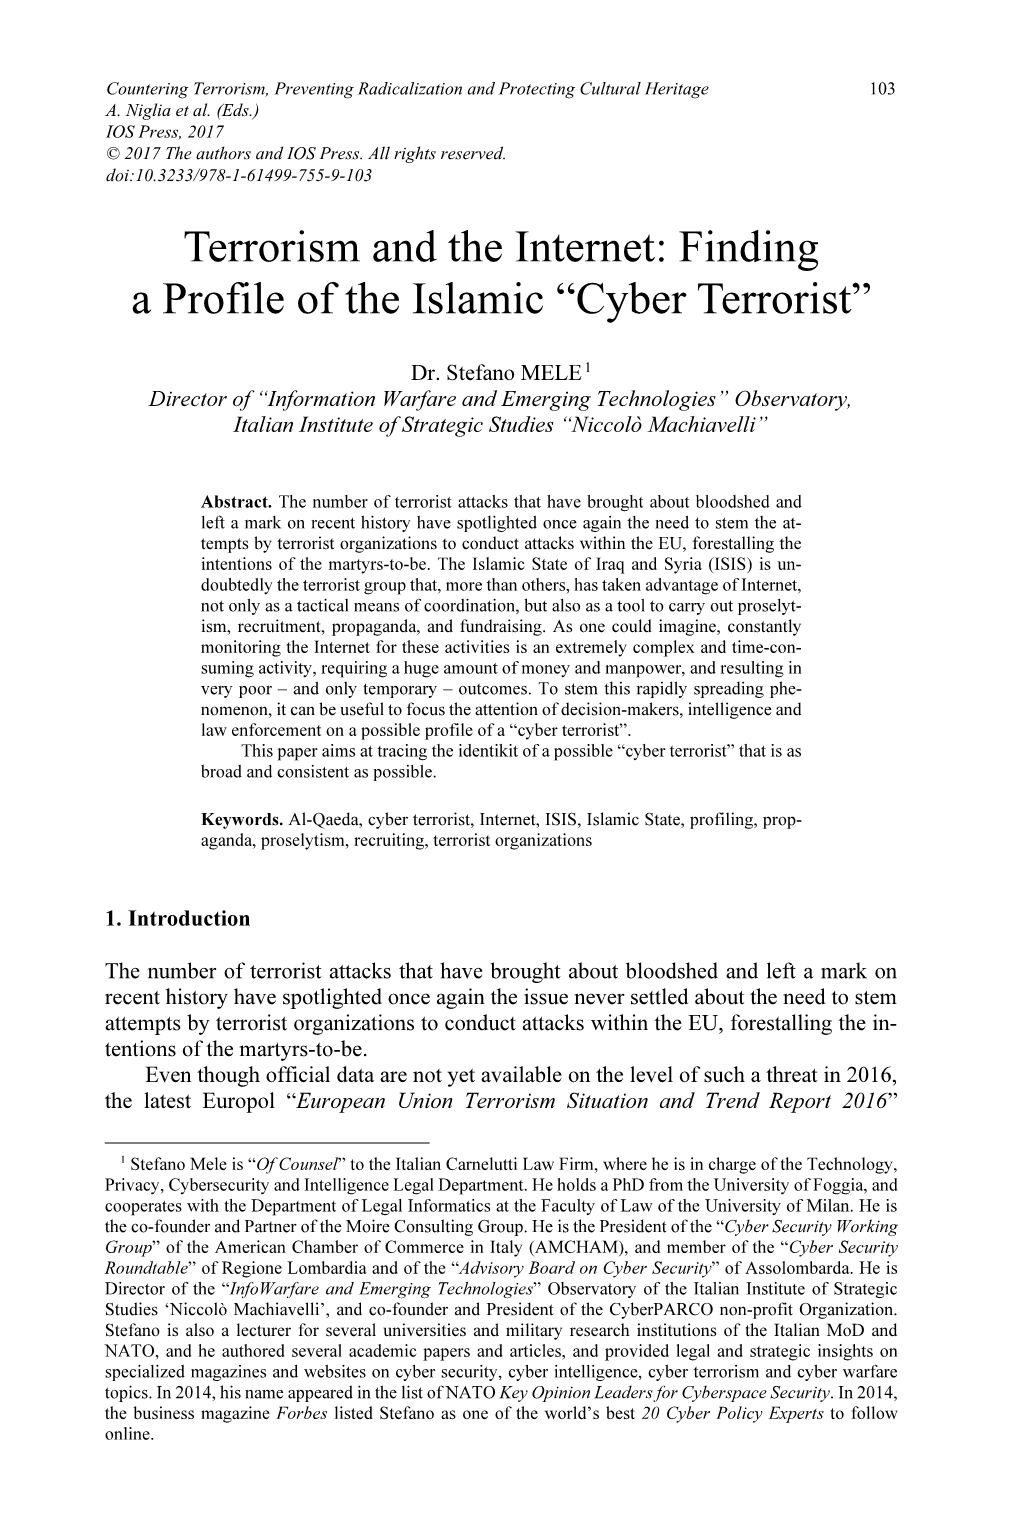 Terrorism and the Internet: Finding a Profile of the Islamic “Cyber Terrorist”